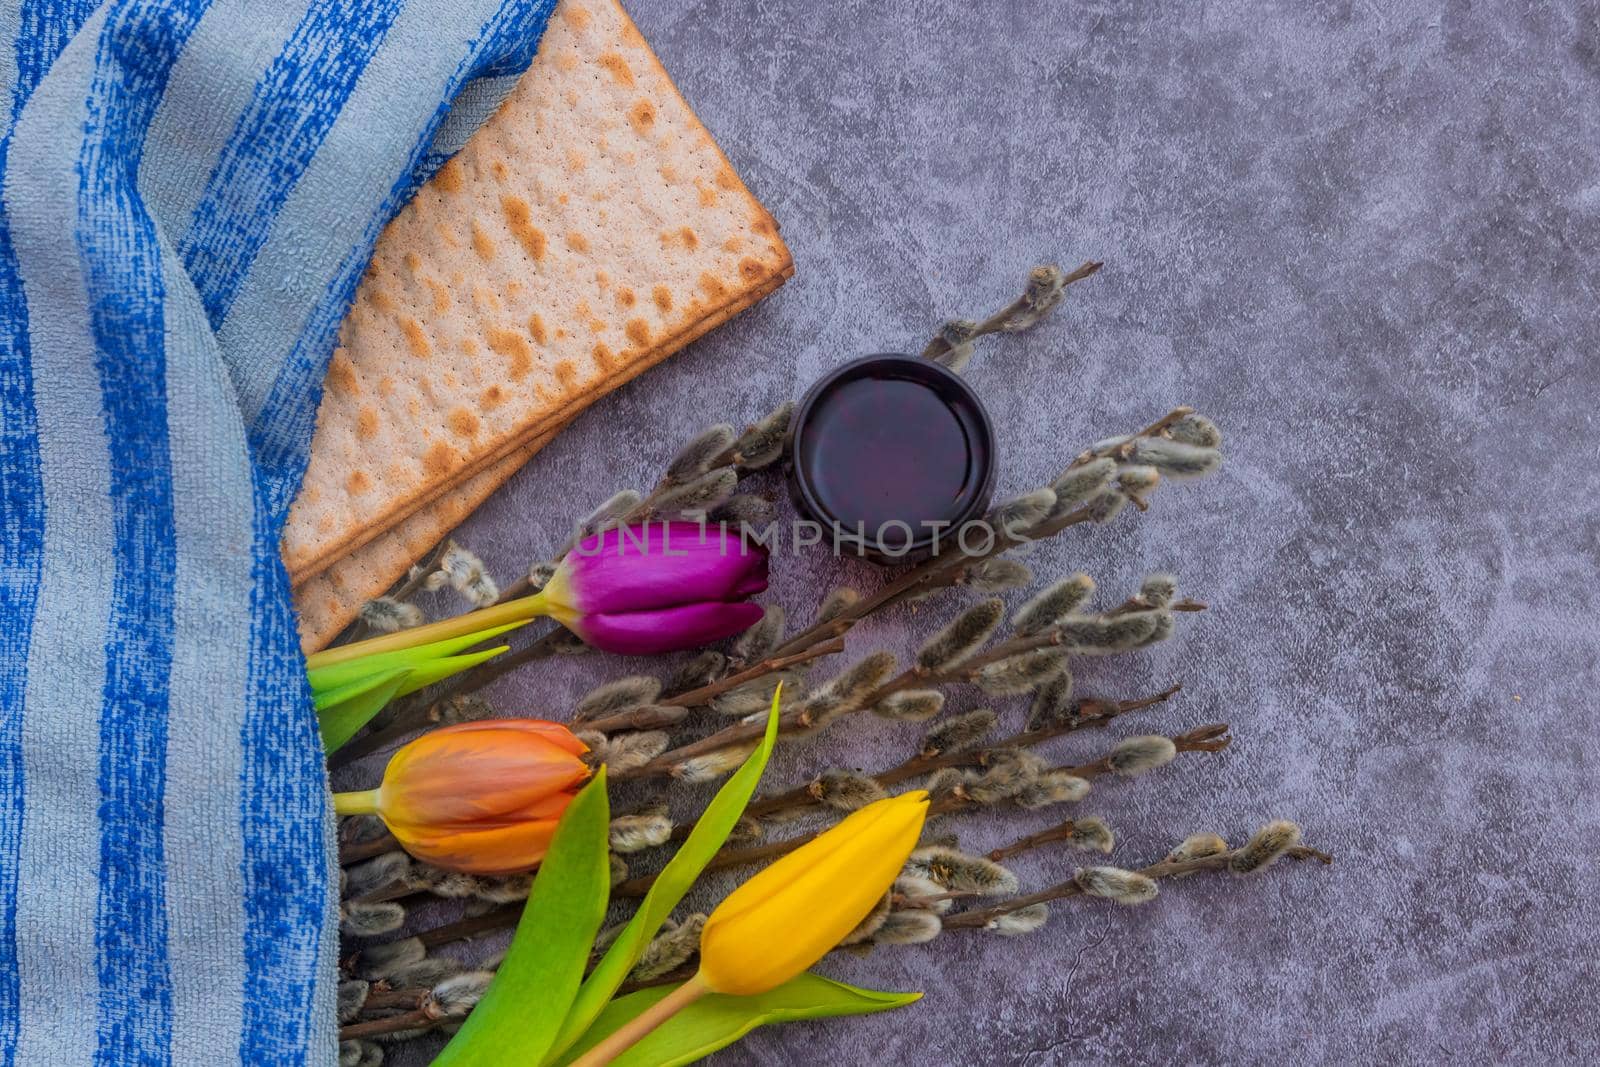 Traditional Pesach celebration Jewish holiday of kosher wine and matzah bread for the ceremony ritual blessings on Passover